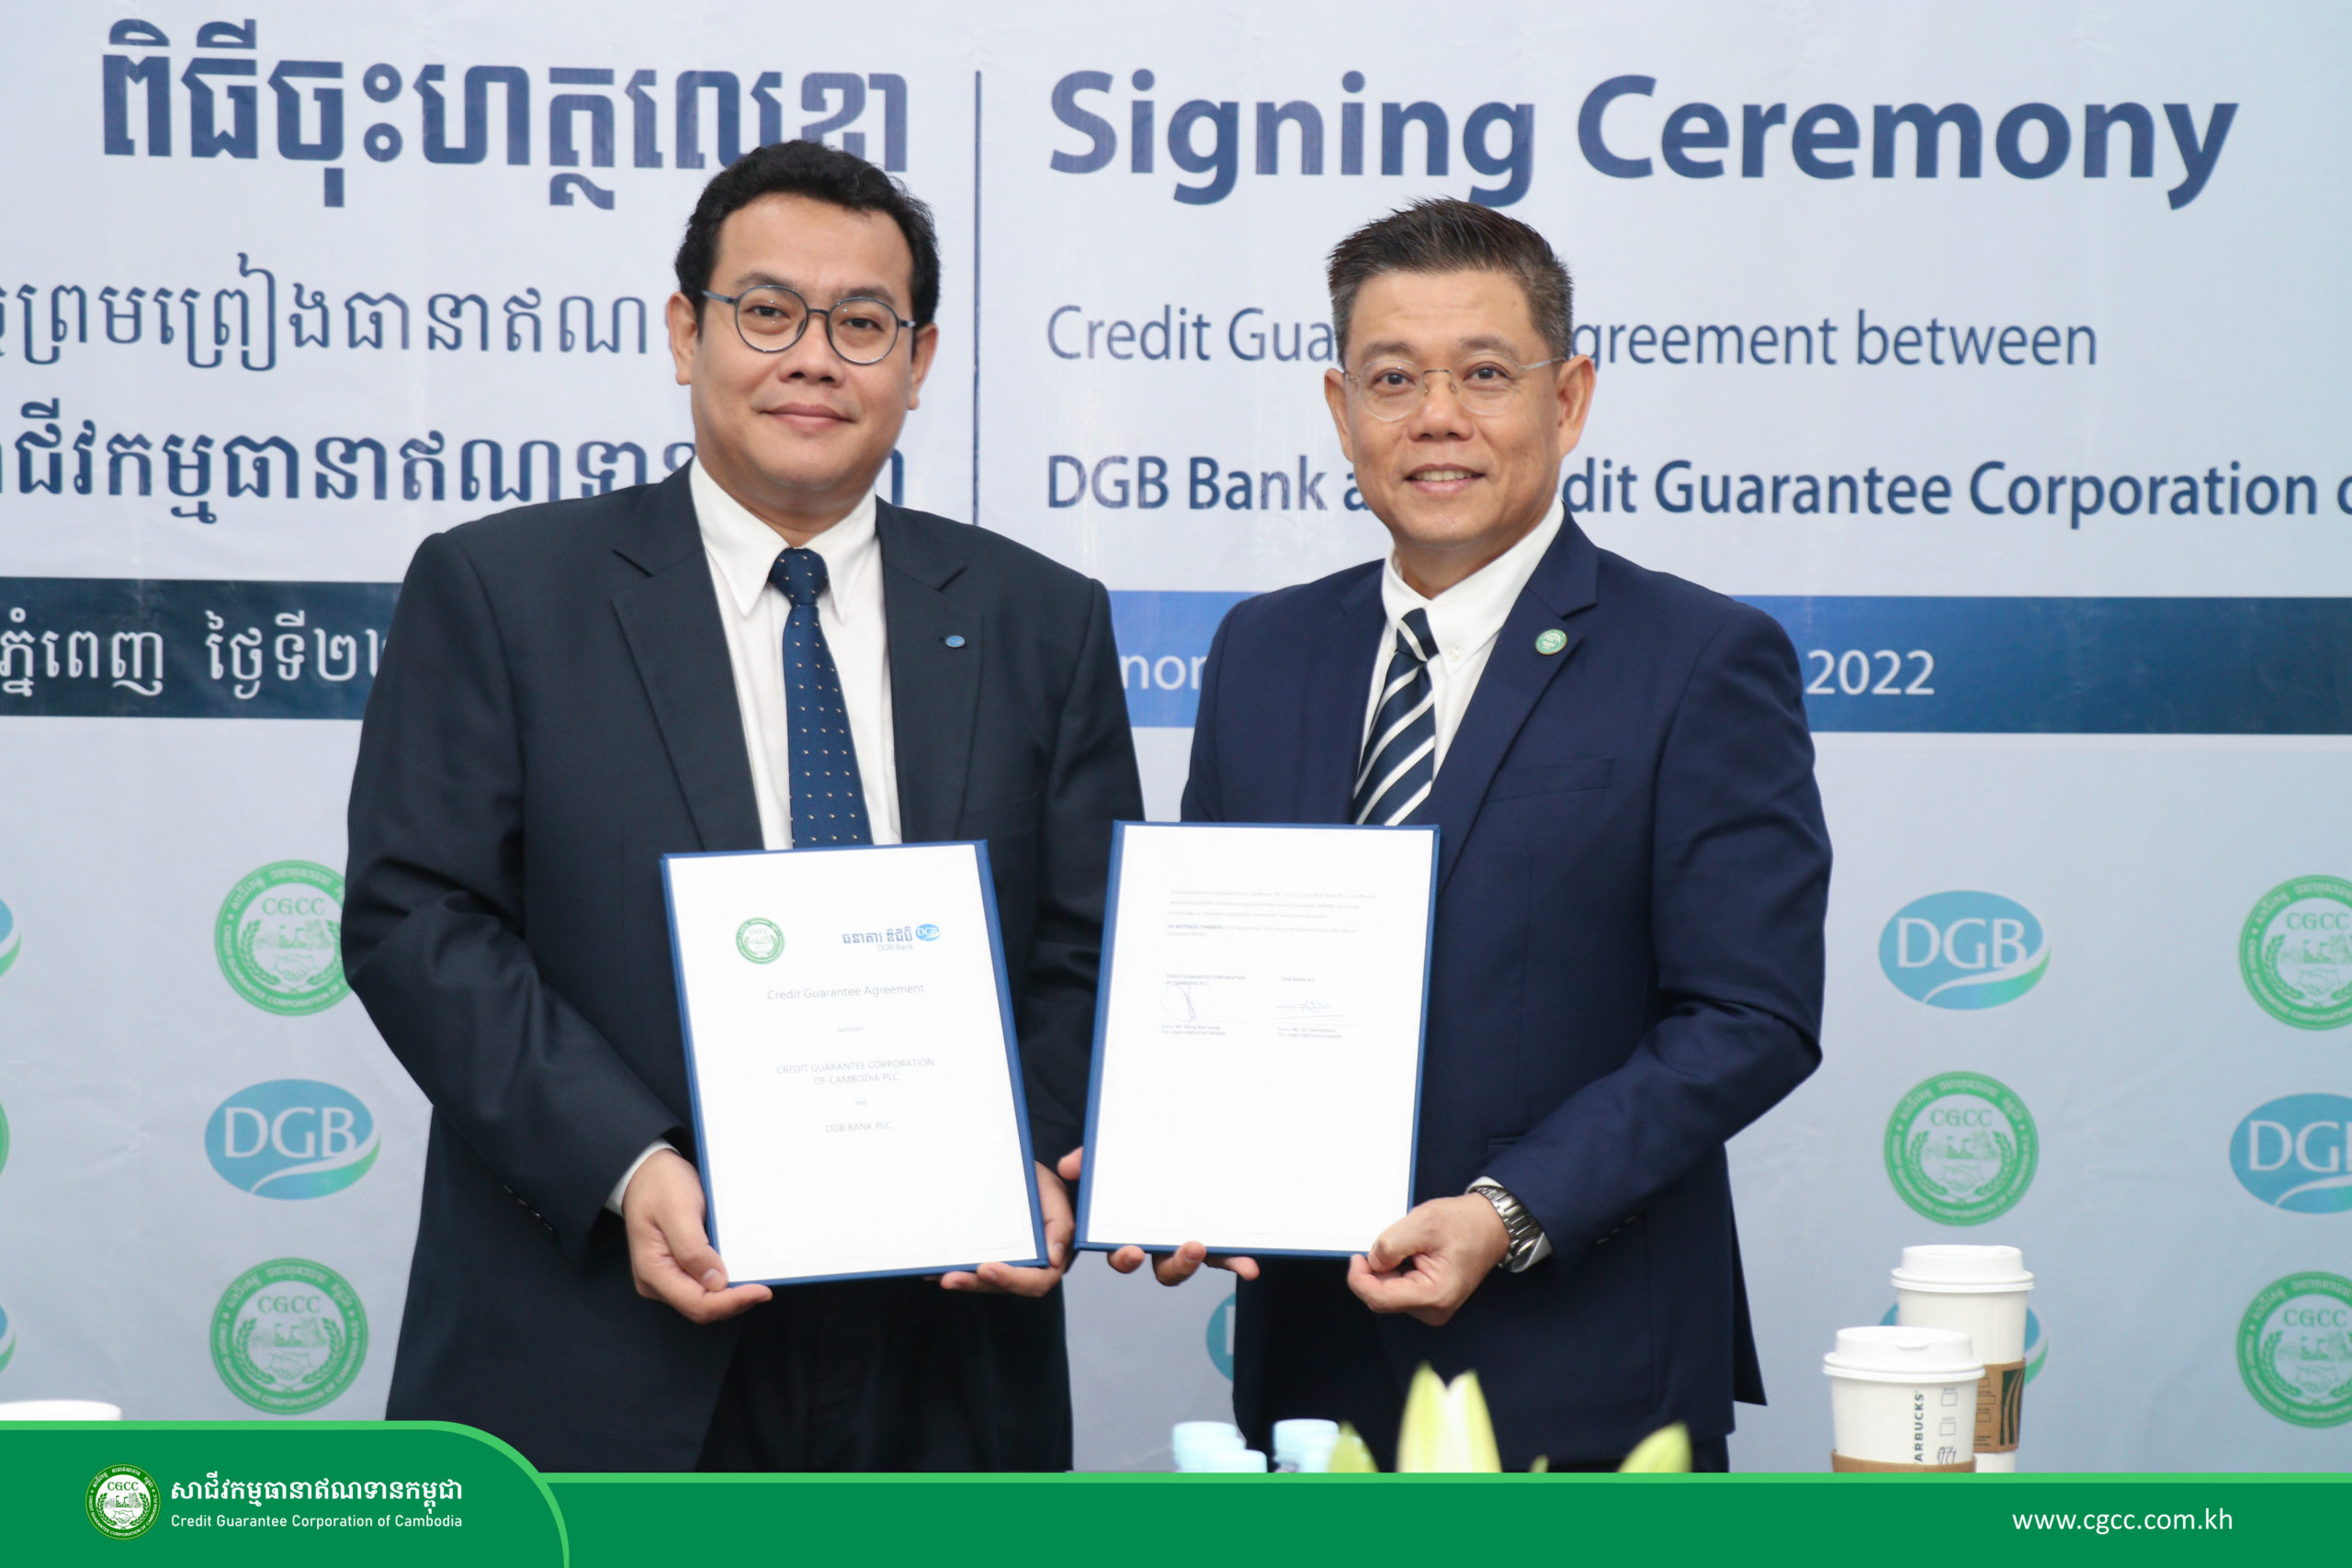 CGCC and DGB Bank signed the partnership of credit guarantee agreement to provide more support for business loans that lack of collateral